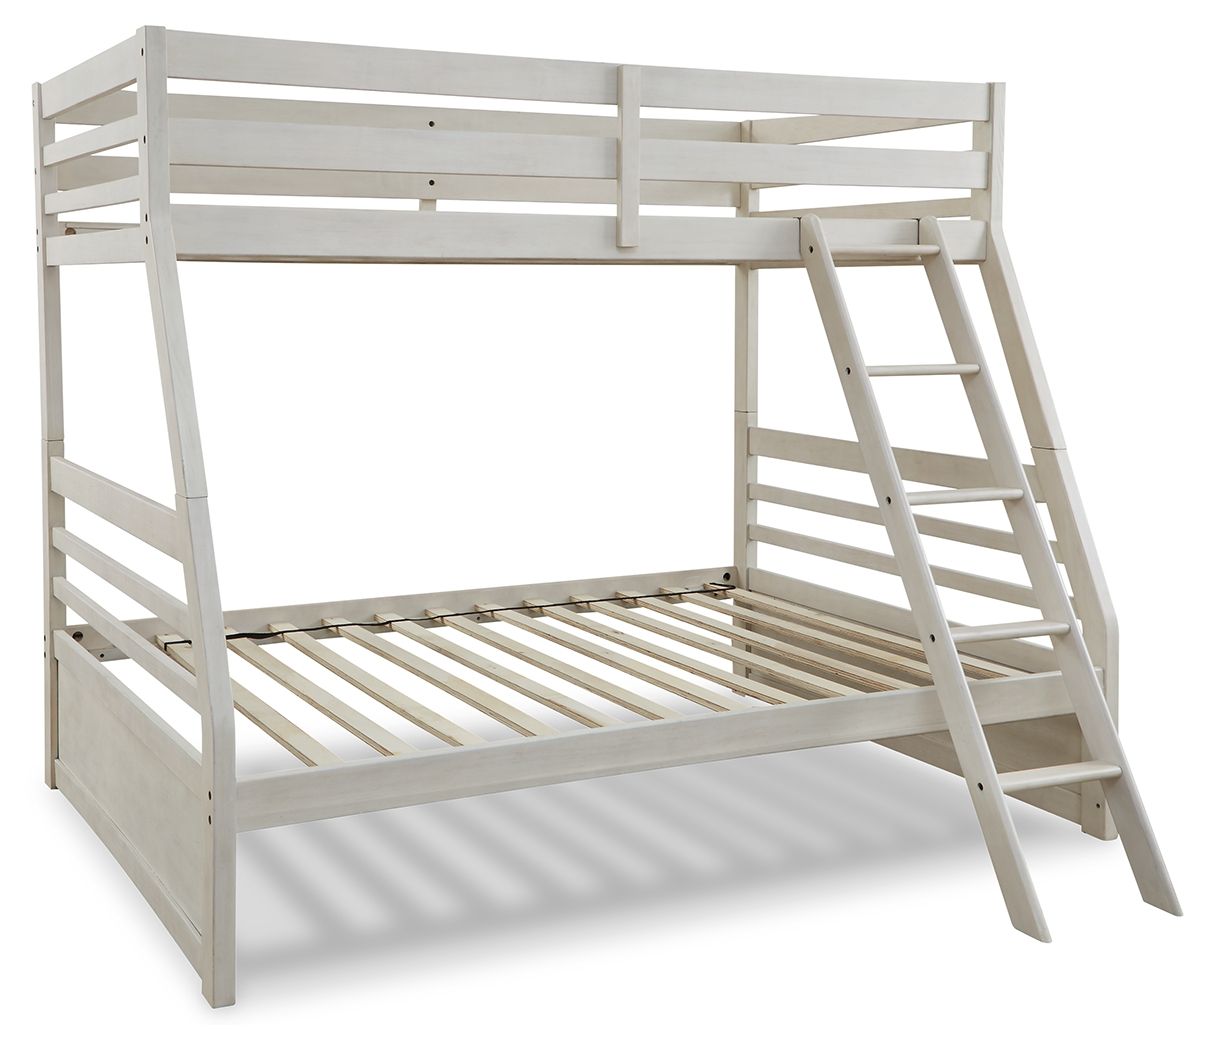 Robbinsdale - Bunk Bed With Storage - Tony's Home Furnishings